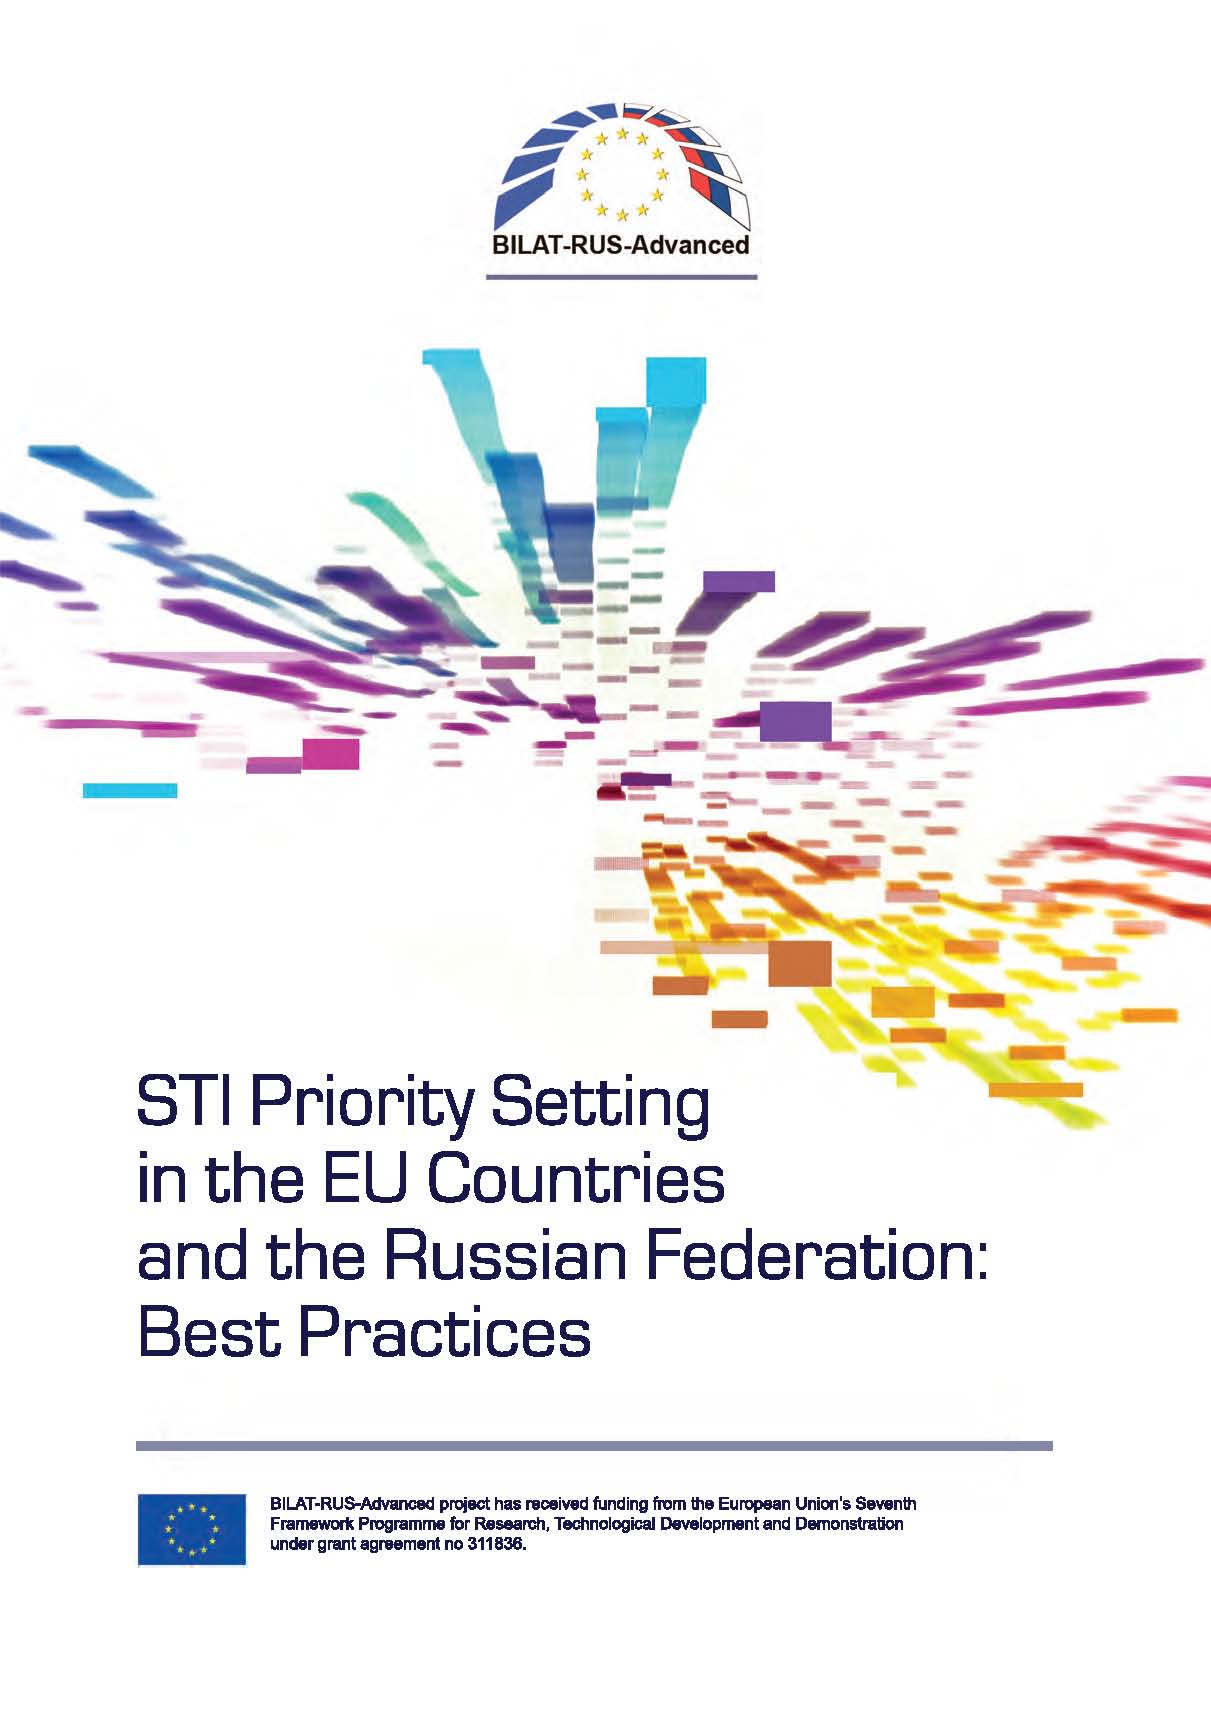 Priority Setting in the EU Countries and the Russian Federation: The Best Practices